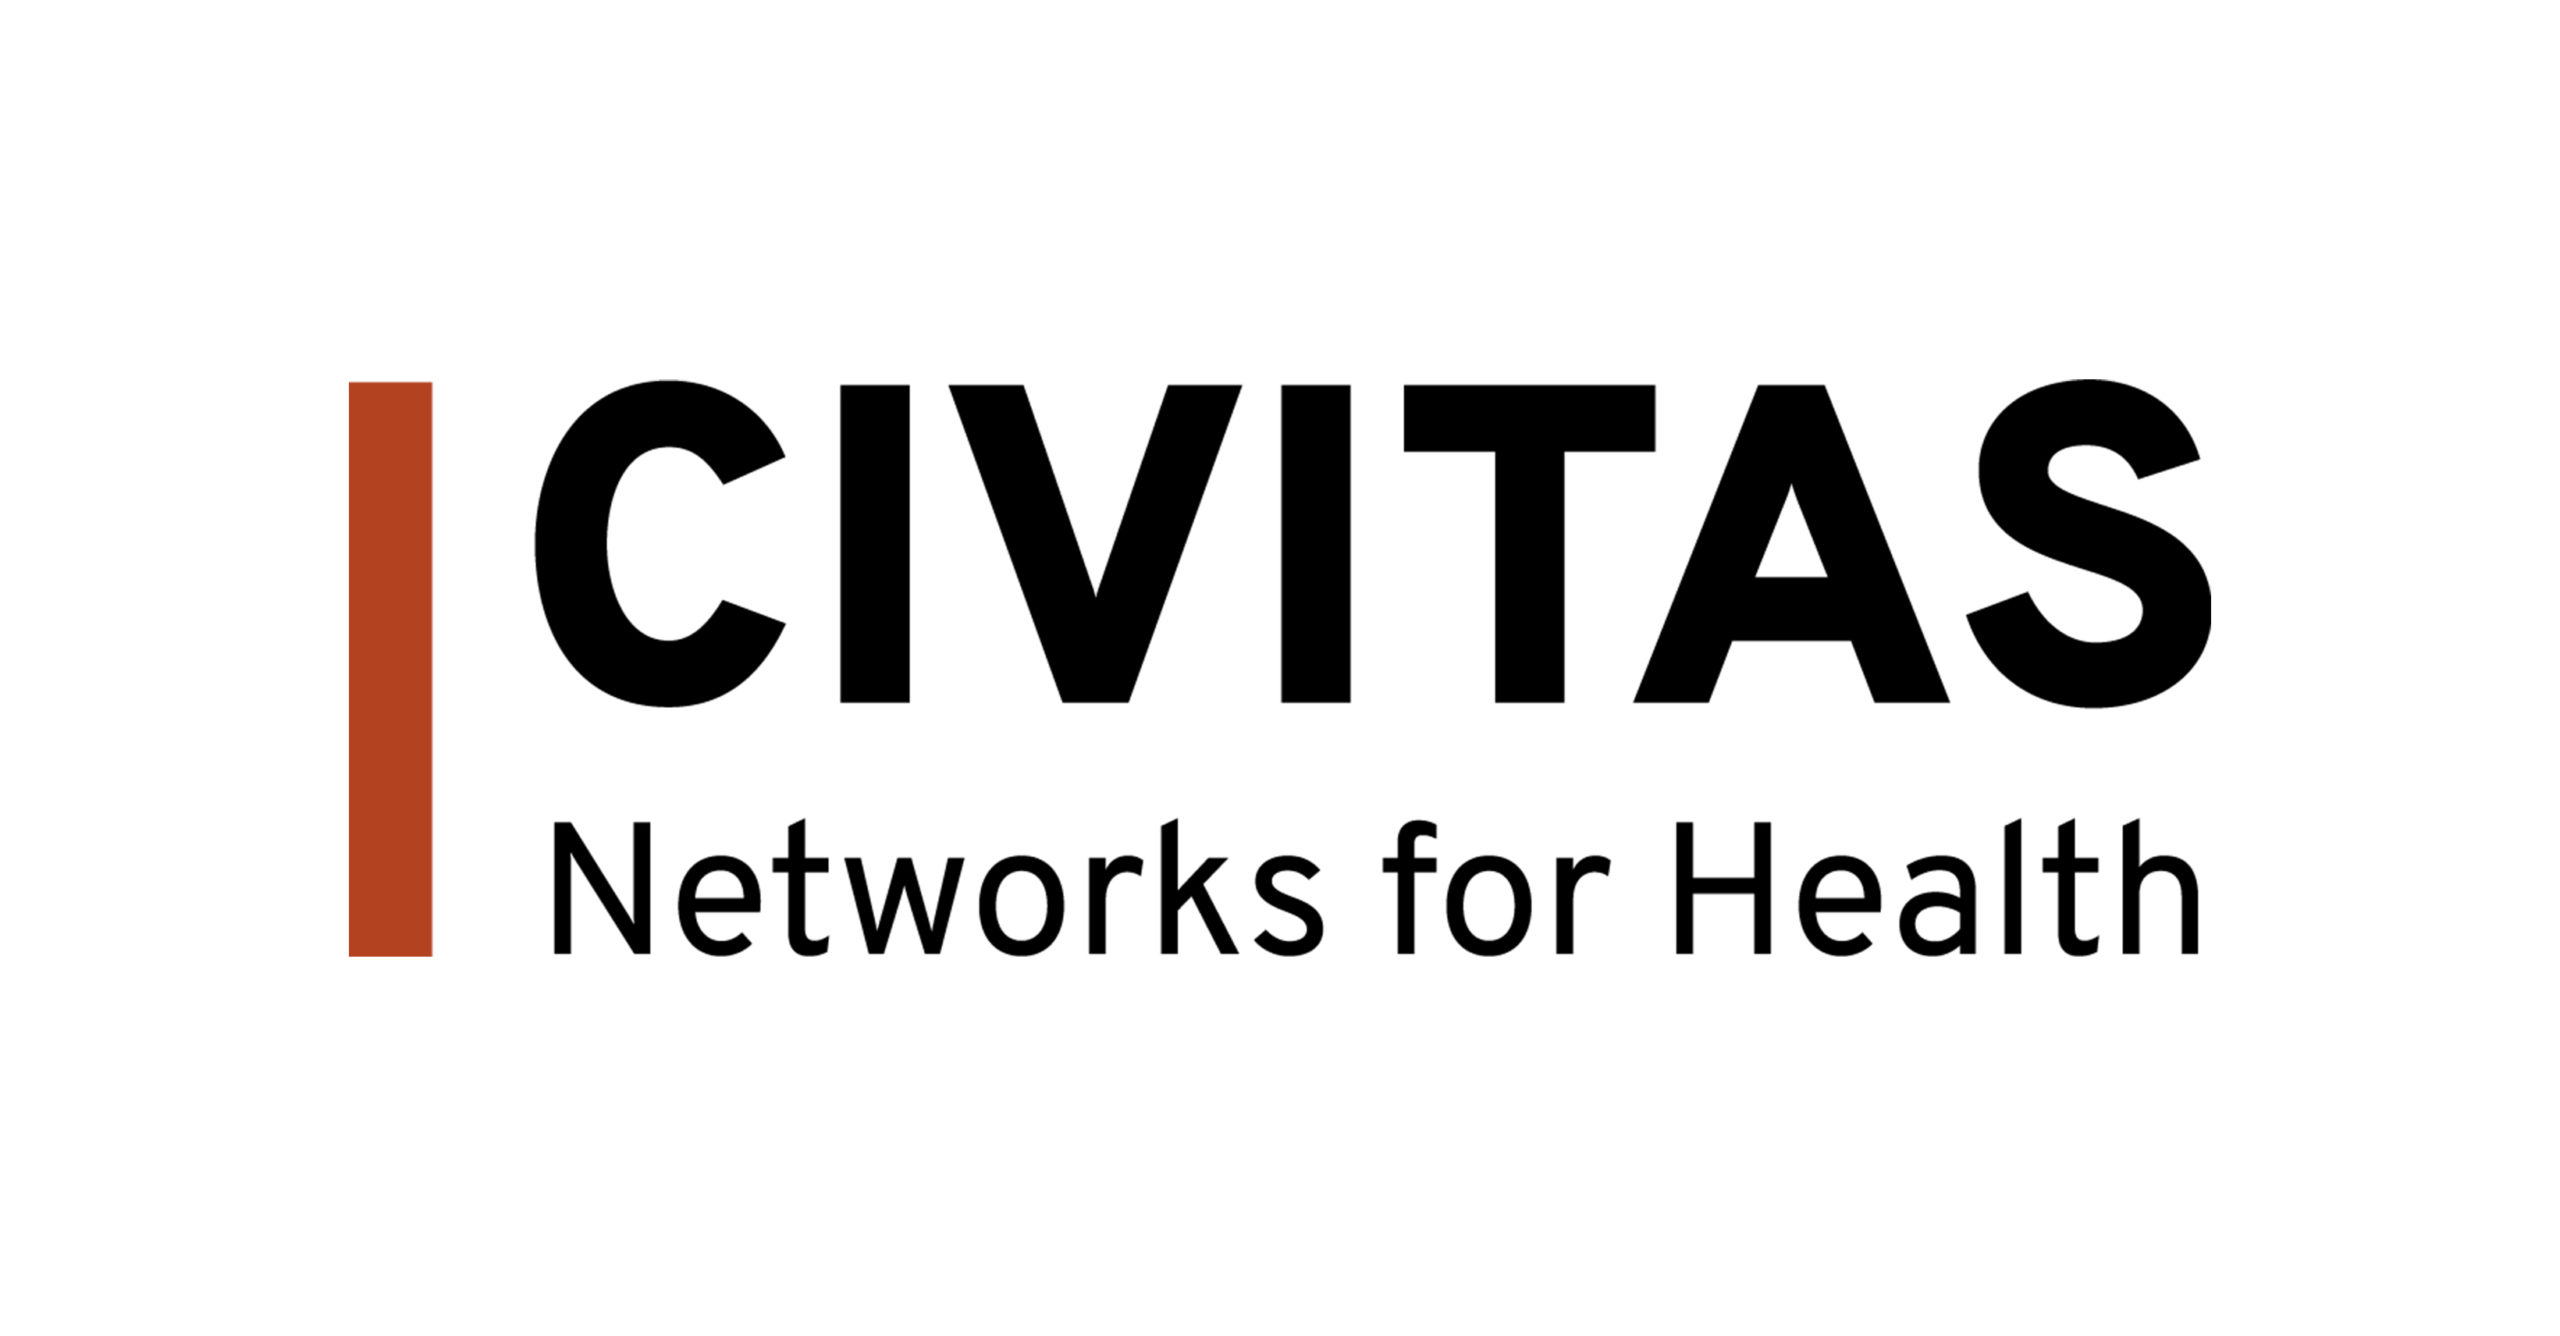 2022 Annual Conference Civitas Networks for Health